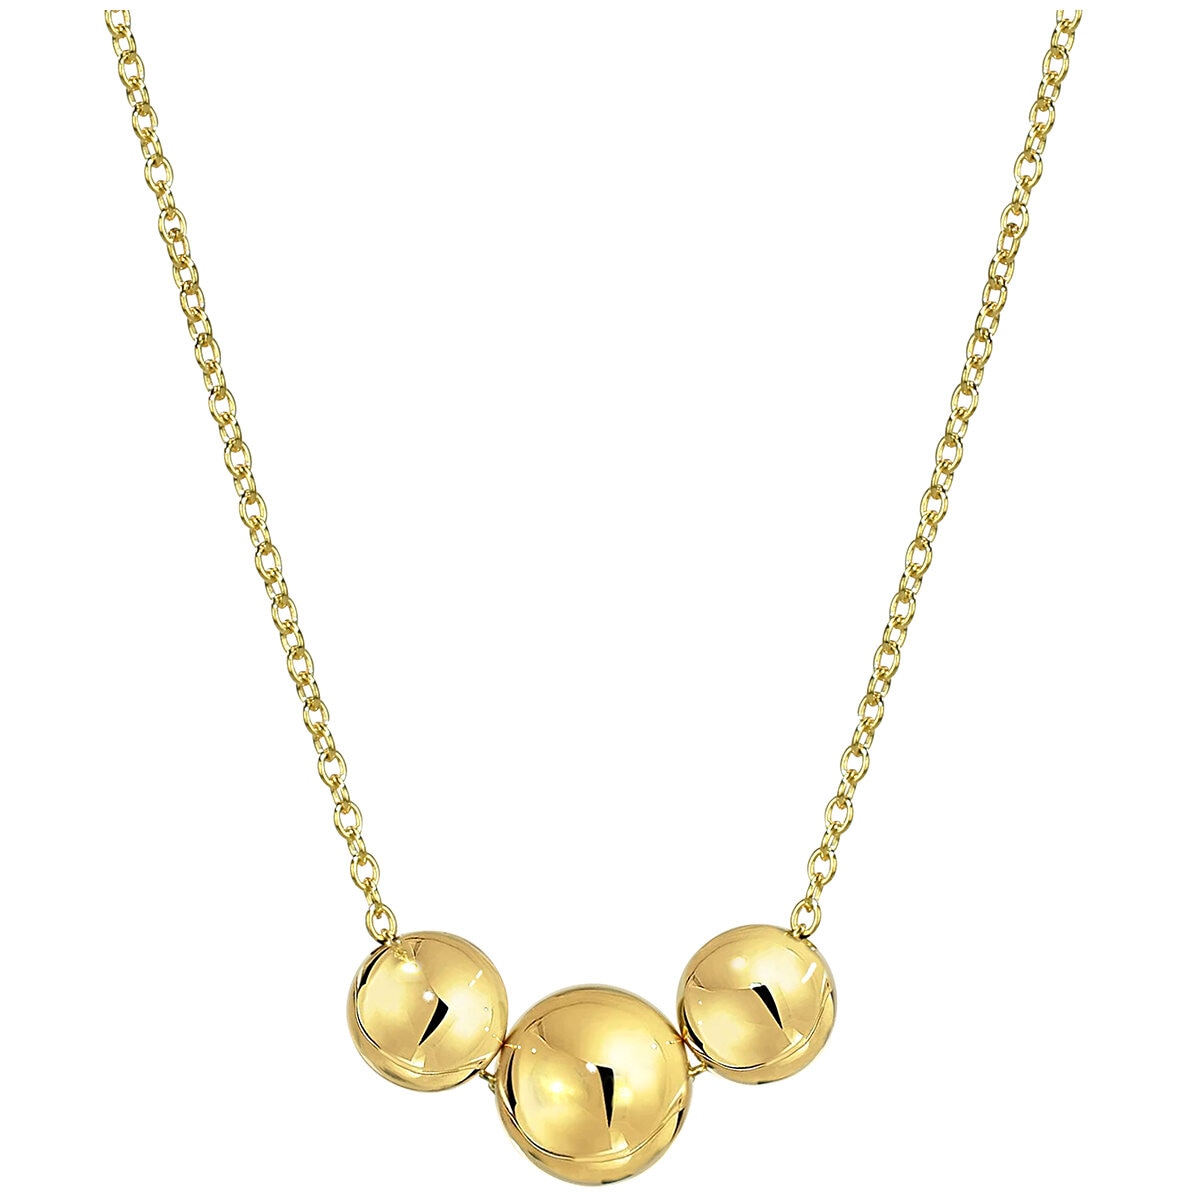 14KT Yellow Gold 3 Globes Chain Necklace 40-45cm